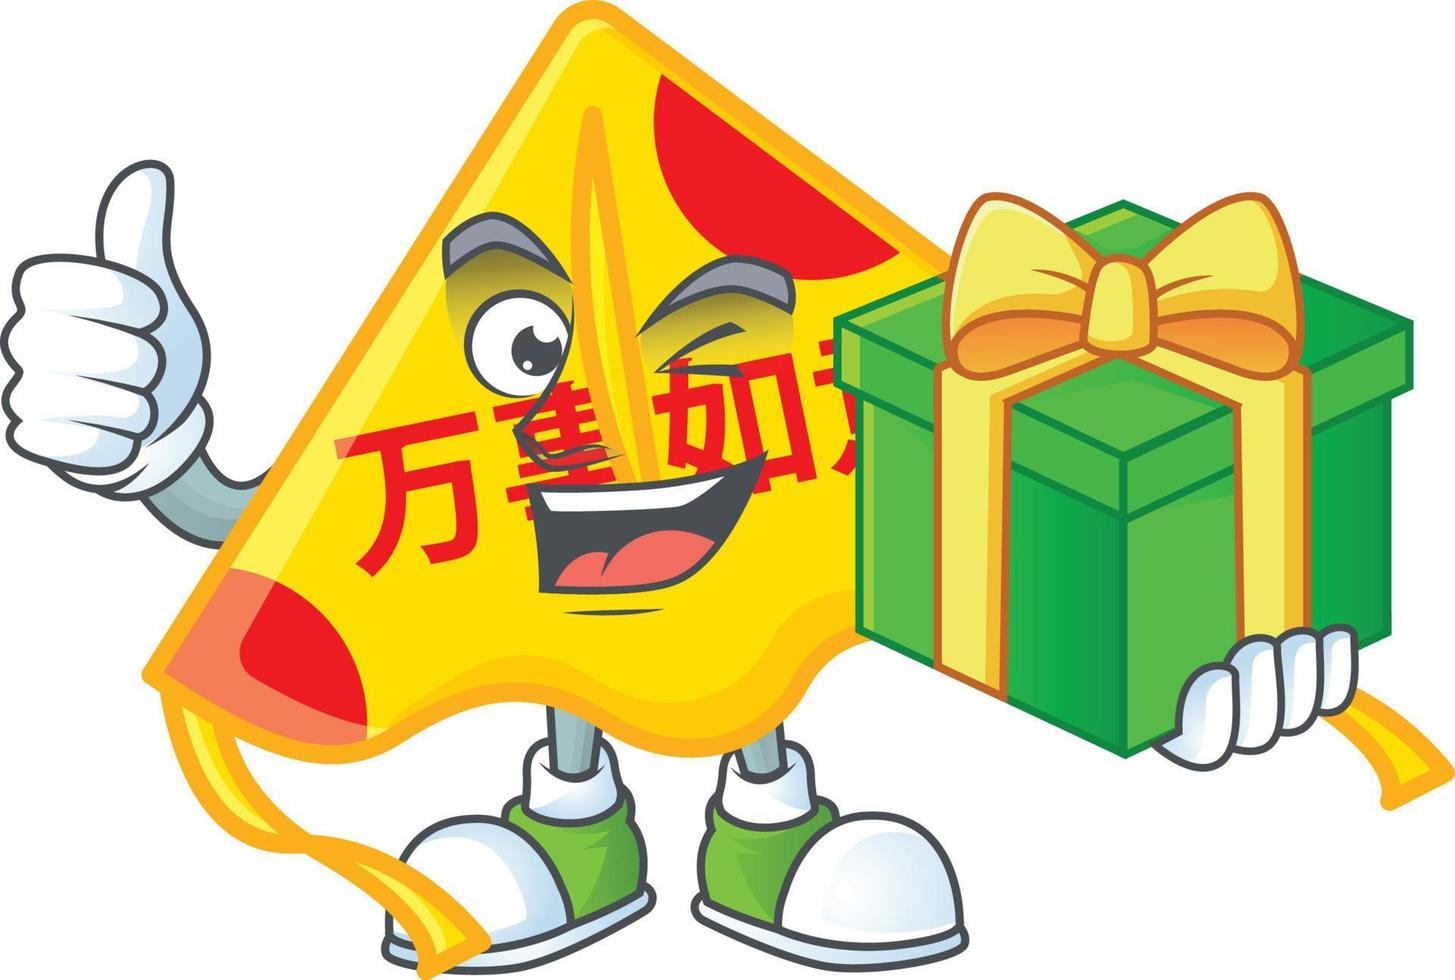 Chinese gold kite cartoon character style vector